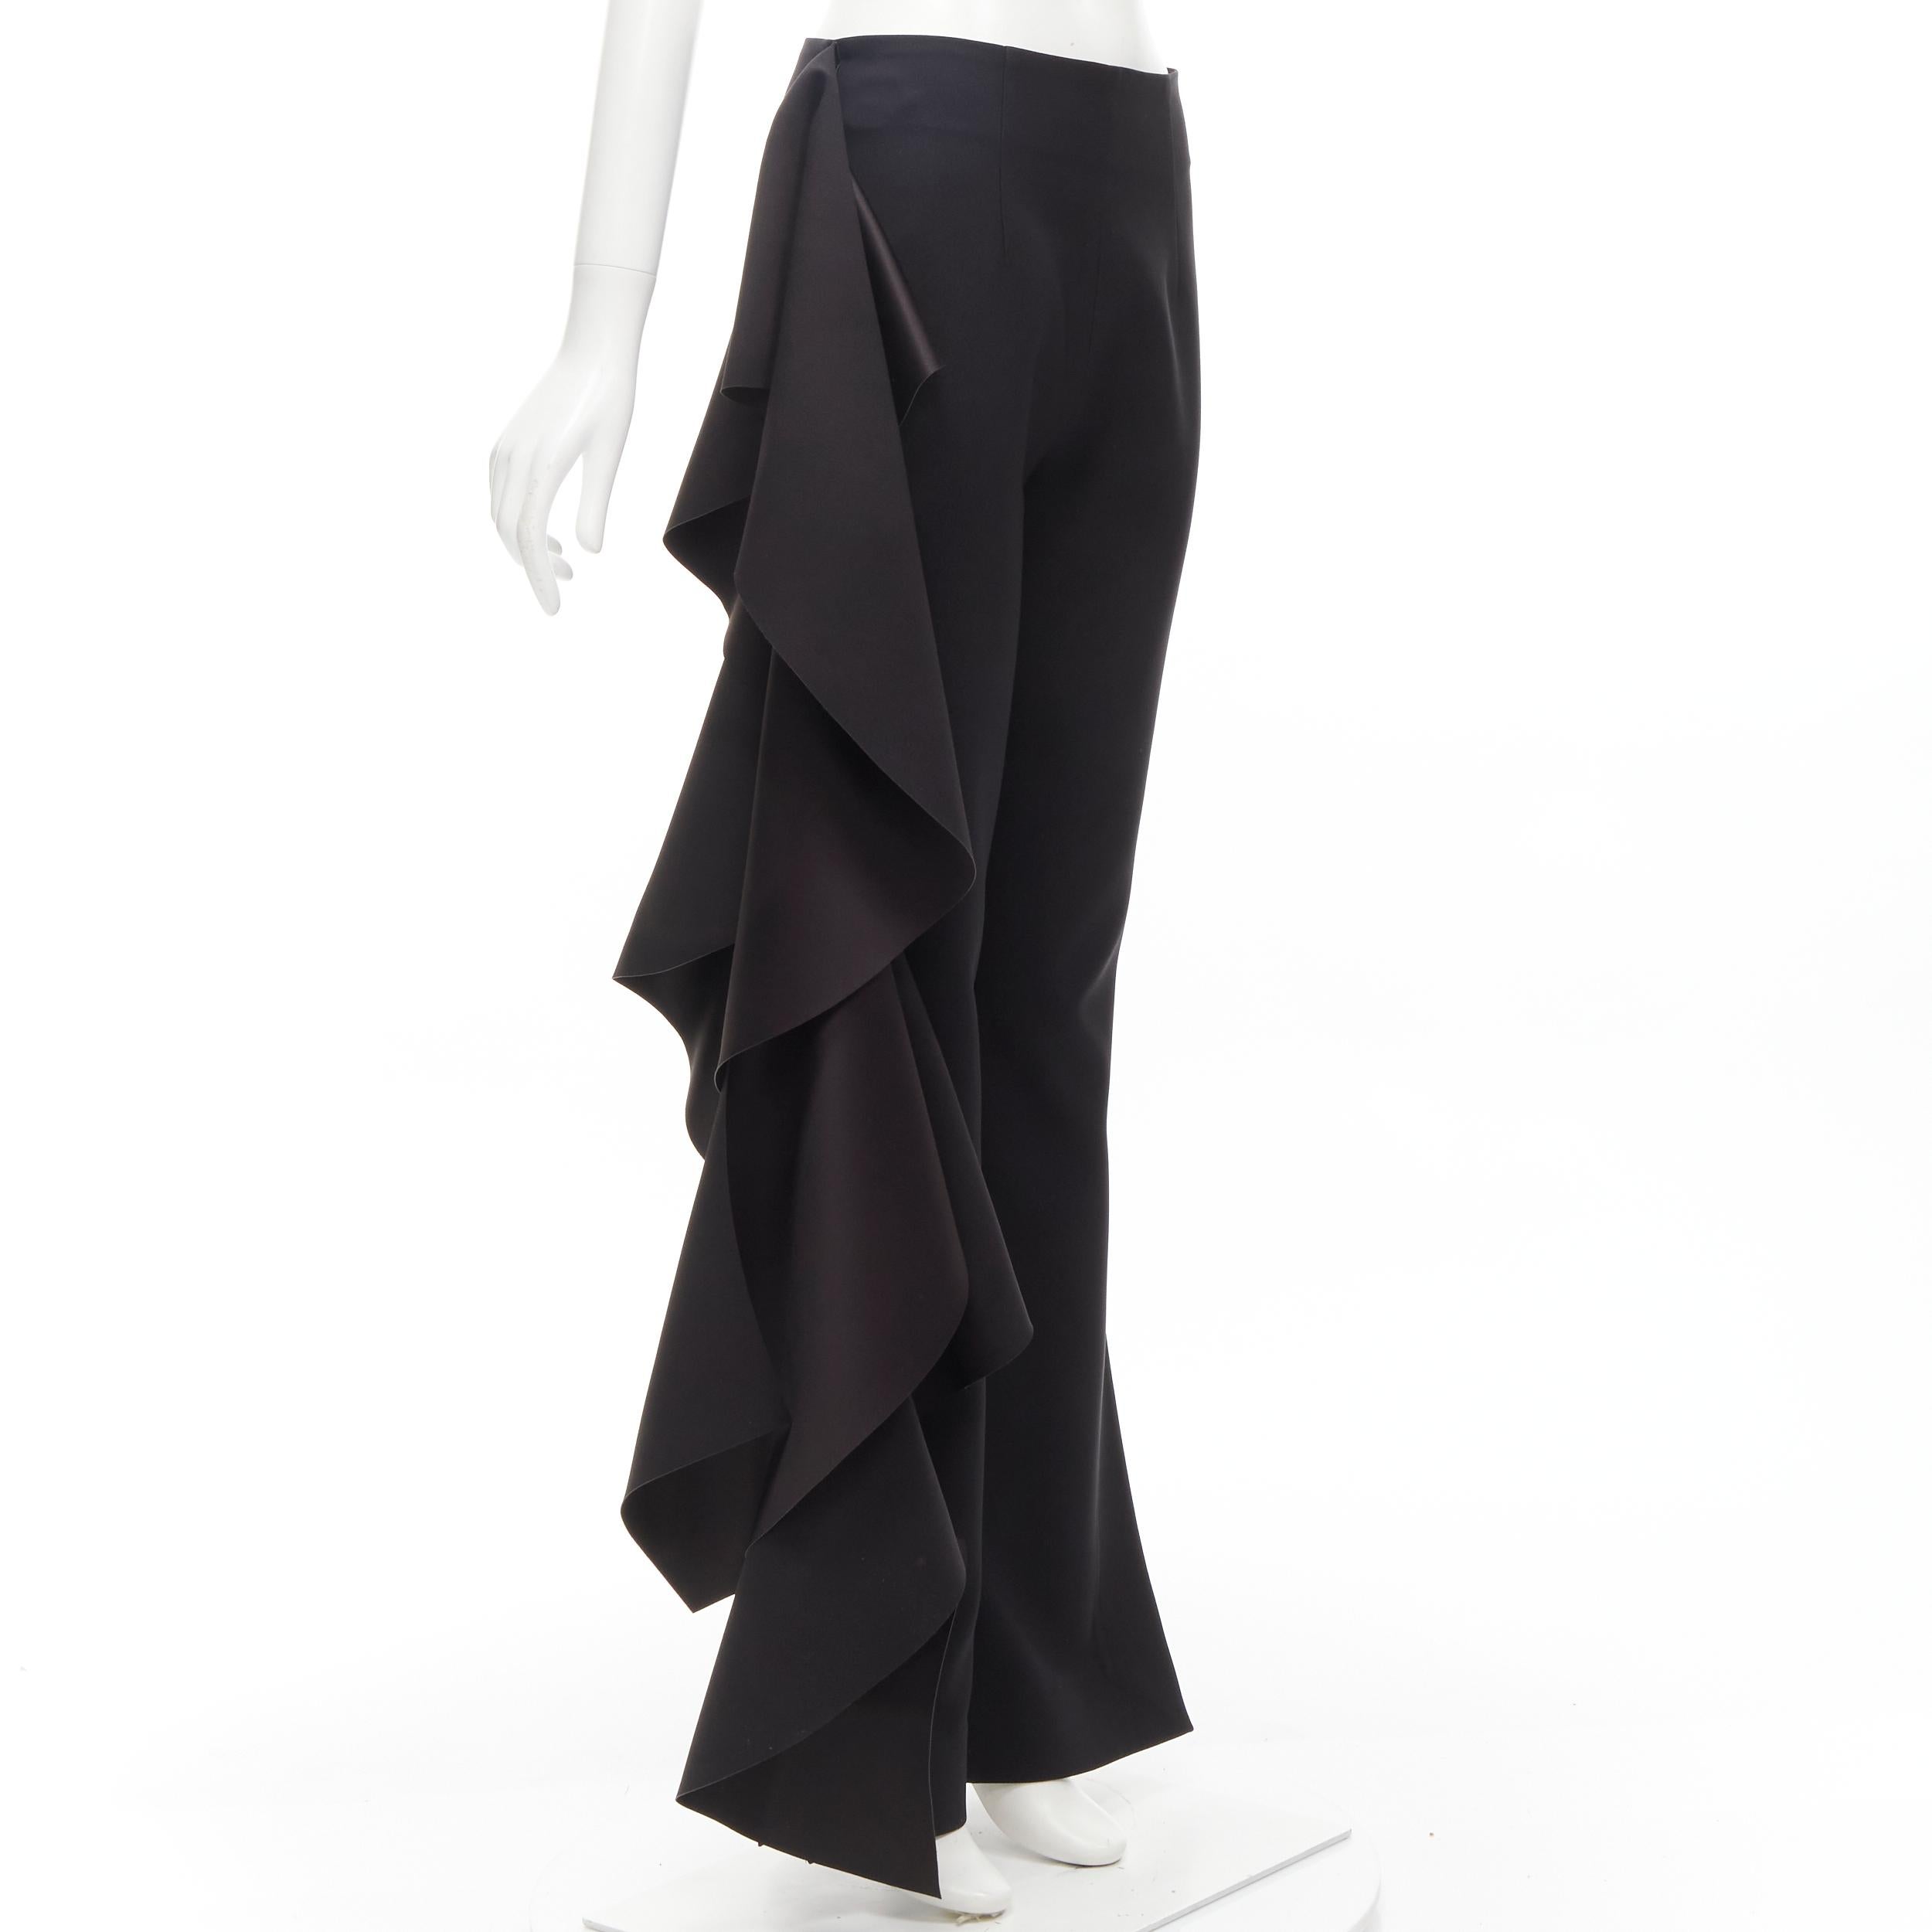 SOLACE black cascade ruffle draped flared trousers pants UK10 US6 M
Brand: Solace London
Material: Polyester
Color: Black
Pattern: Solid
Closure: Zip
Made in: China

CONDITION:
Condition: Excellent, this item was pre-owned and is in excellent